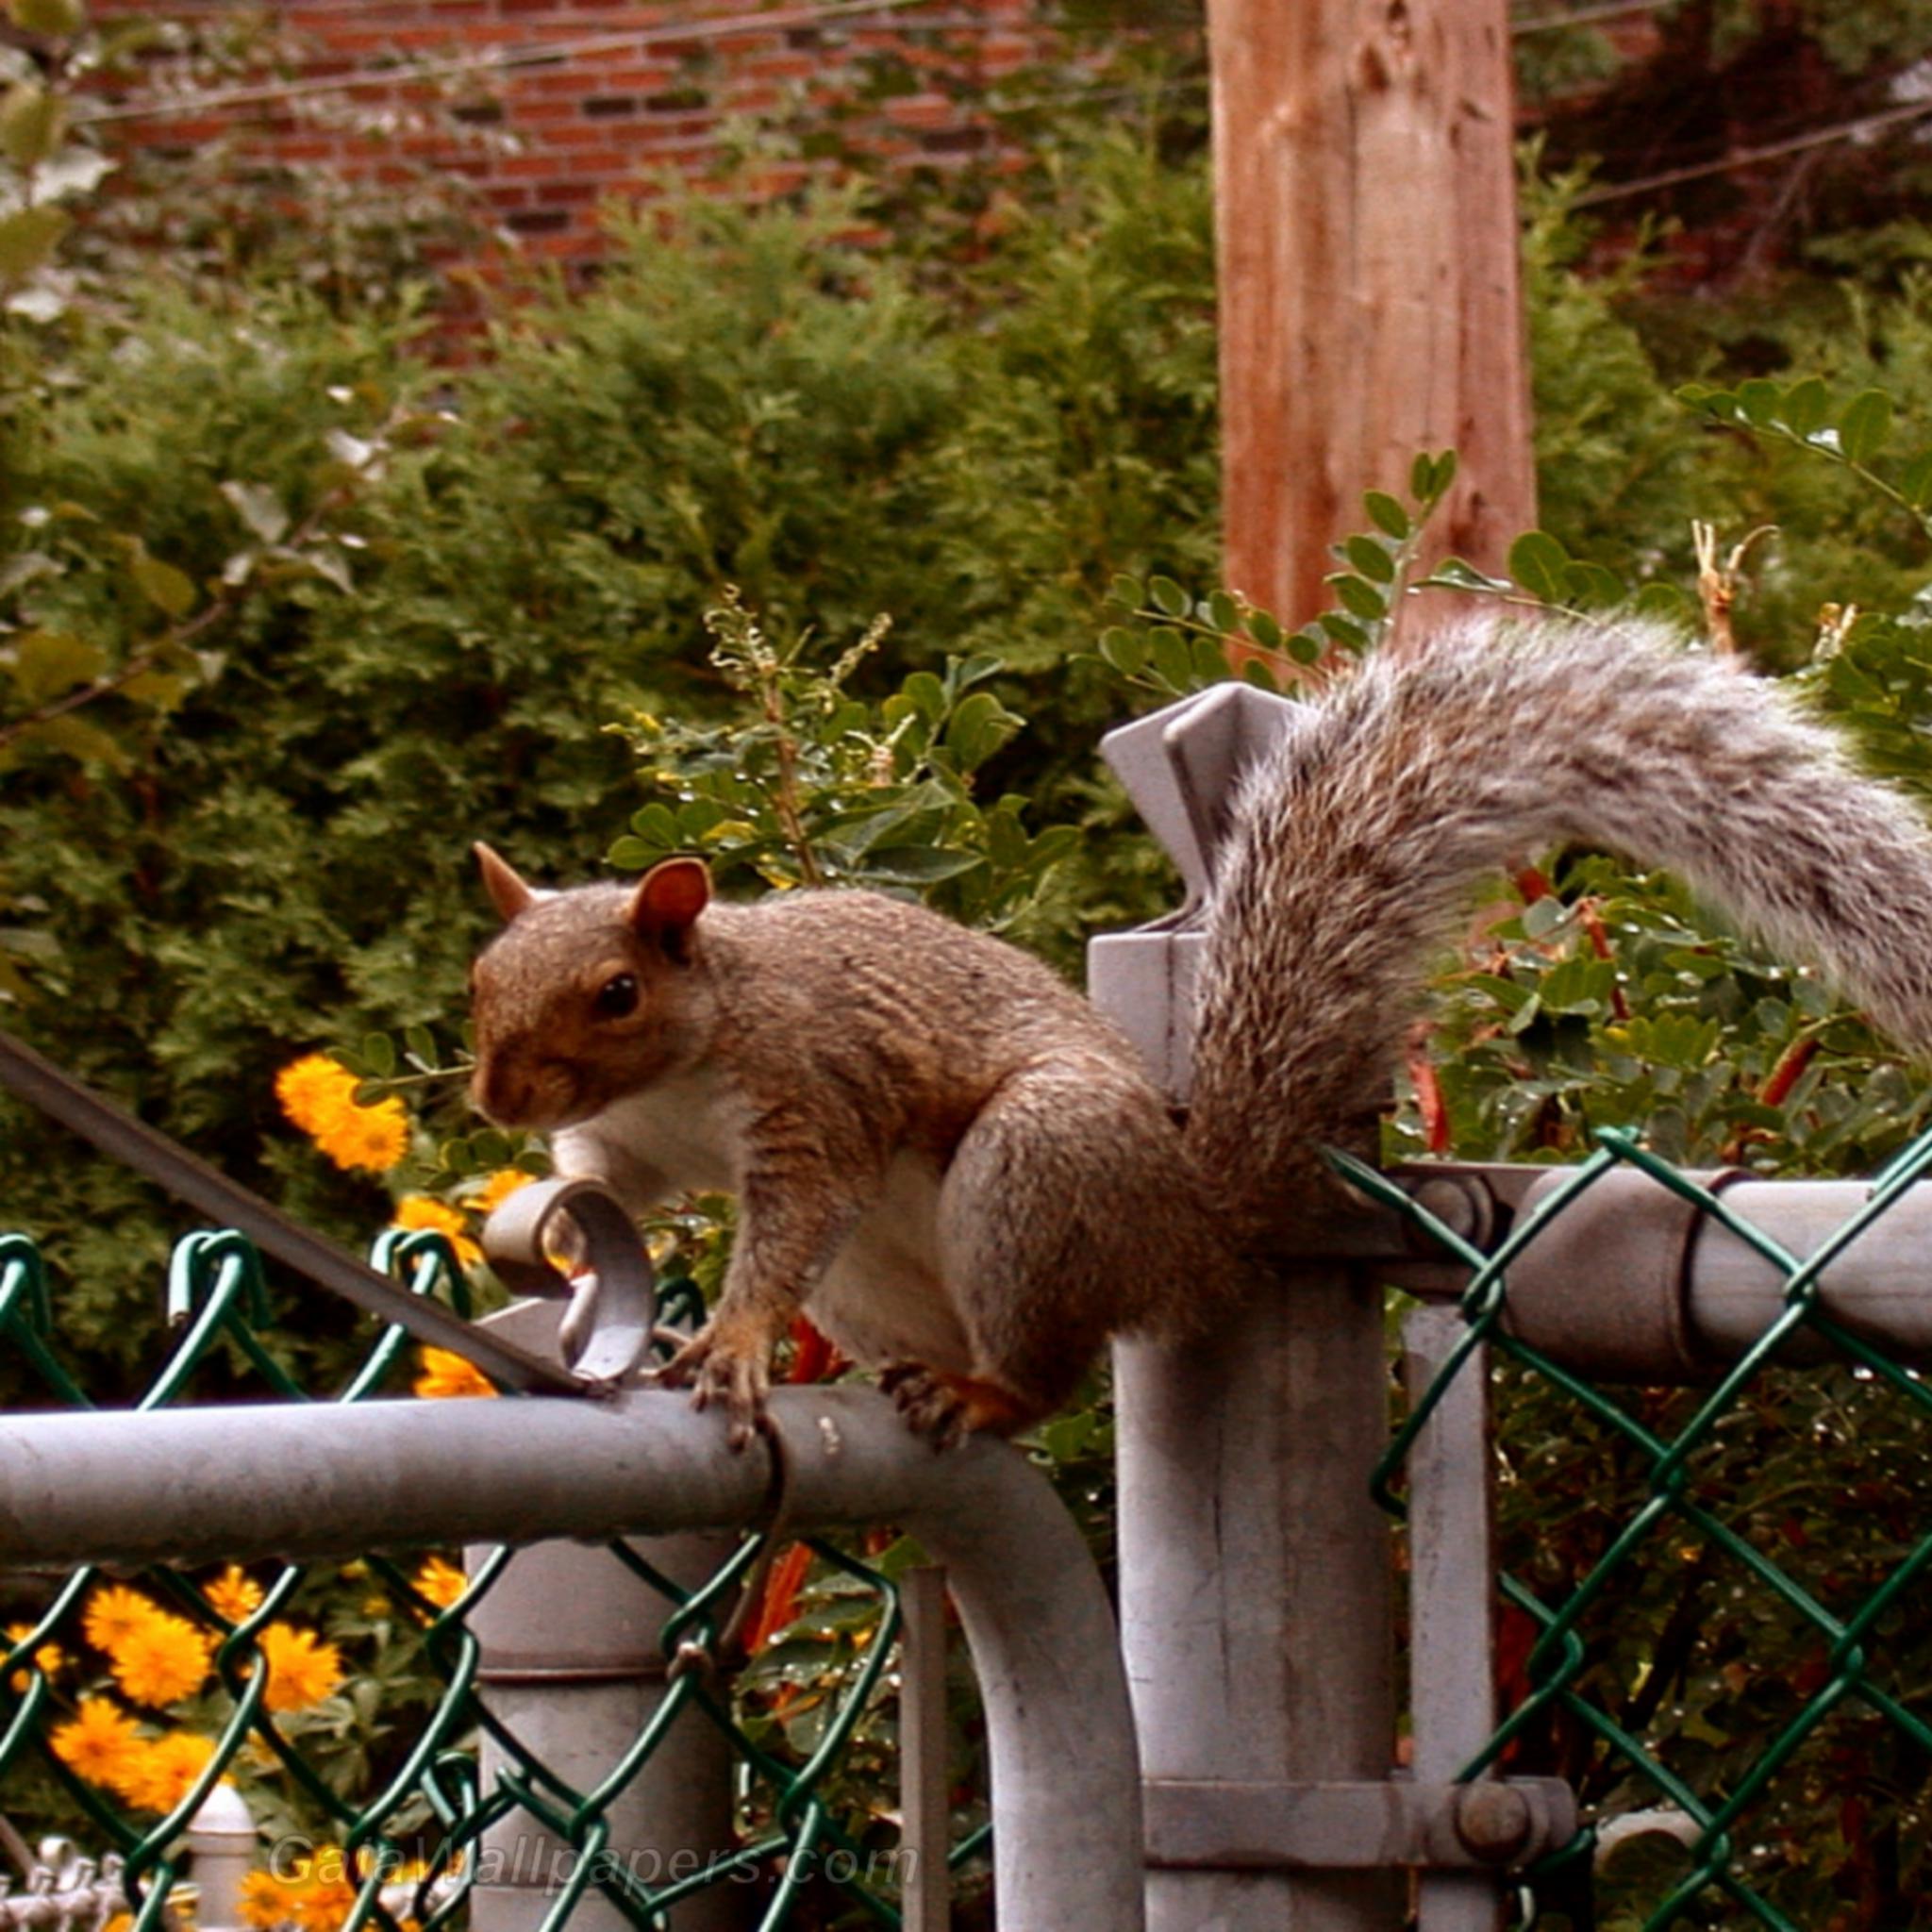 Squirrel walking on the fence - Free desktop wallpapers